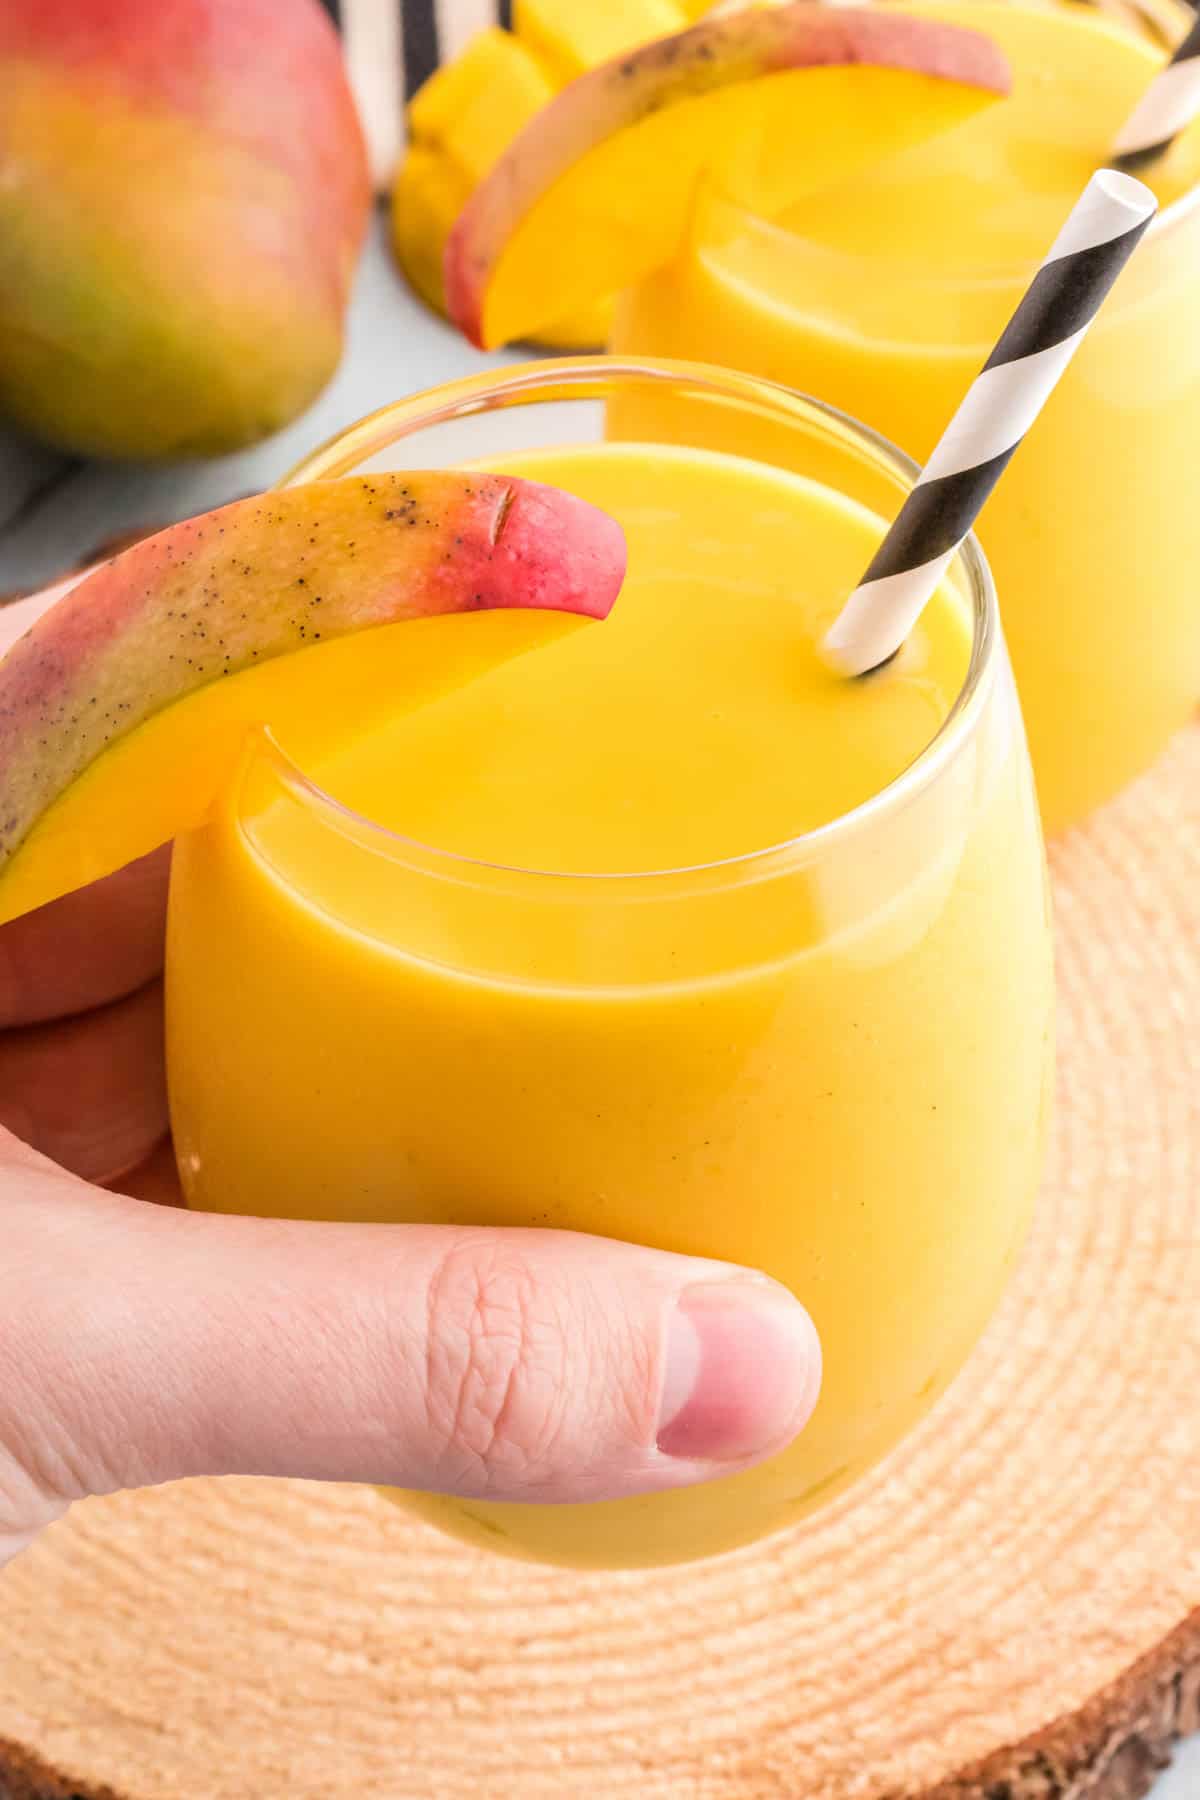 A hand lifting a glass of mango lassi drink.